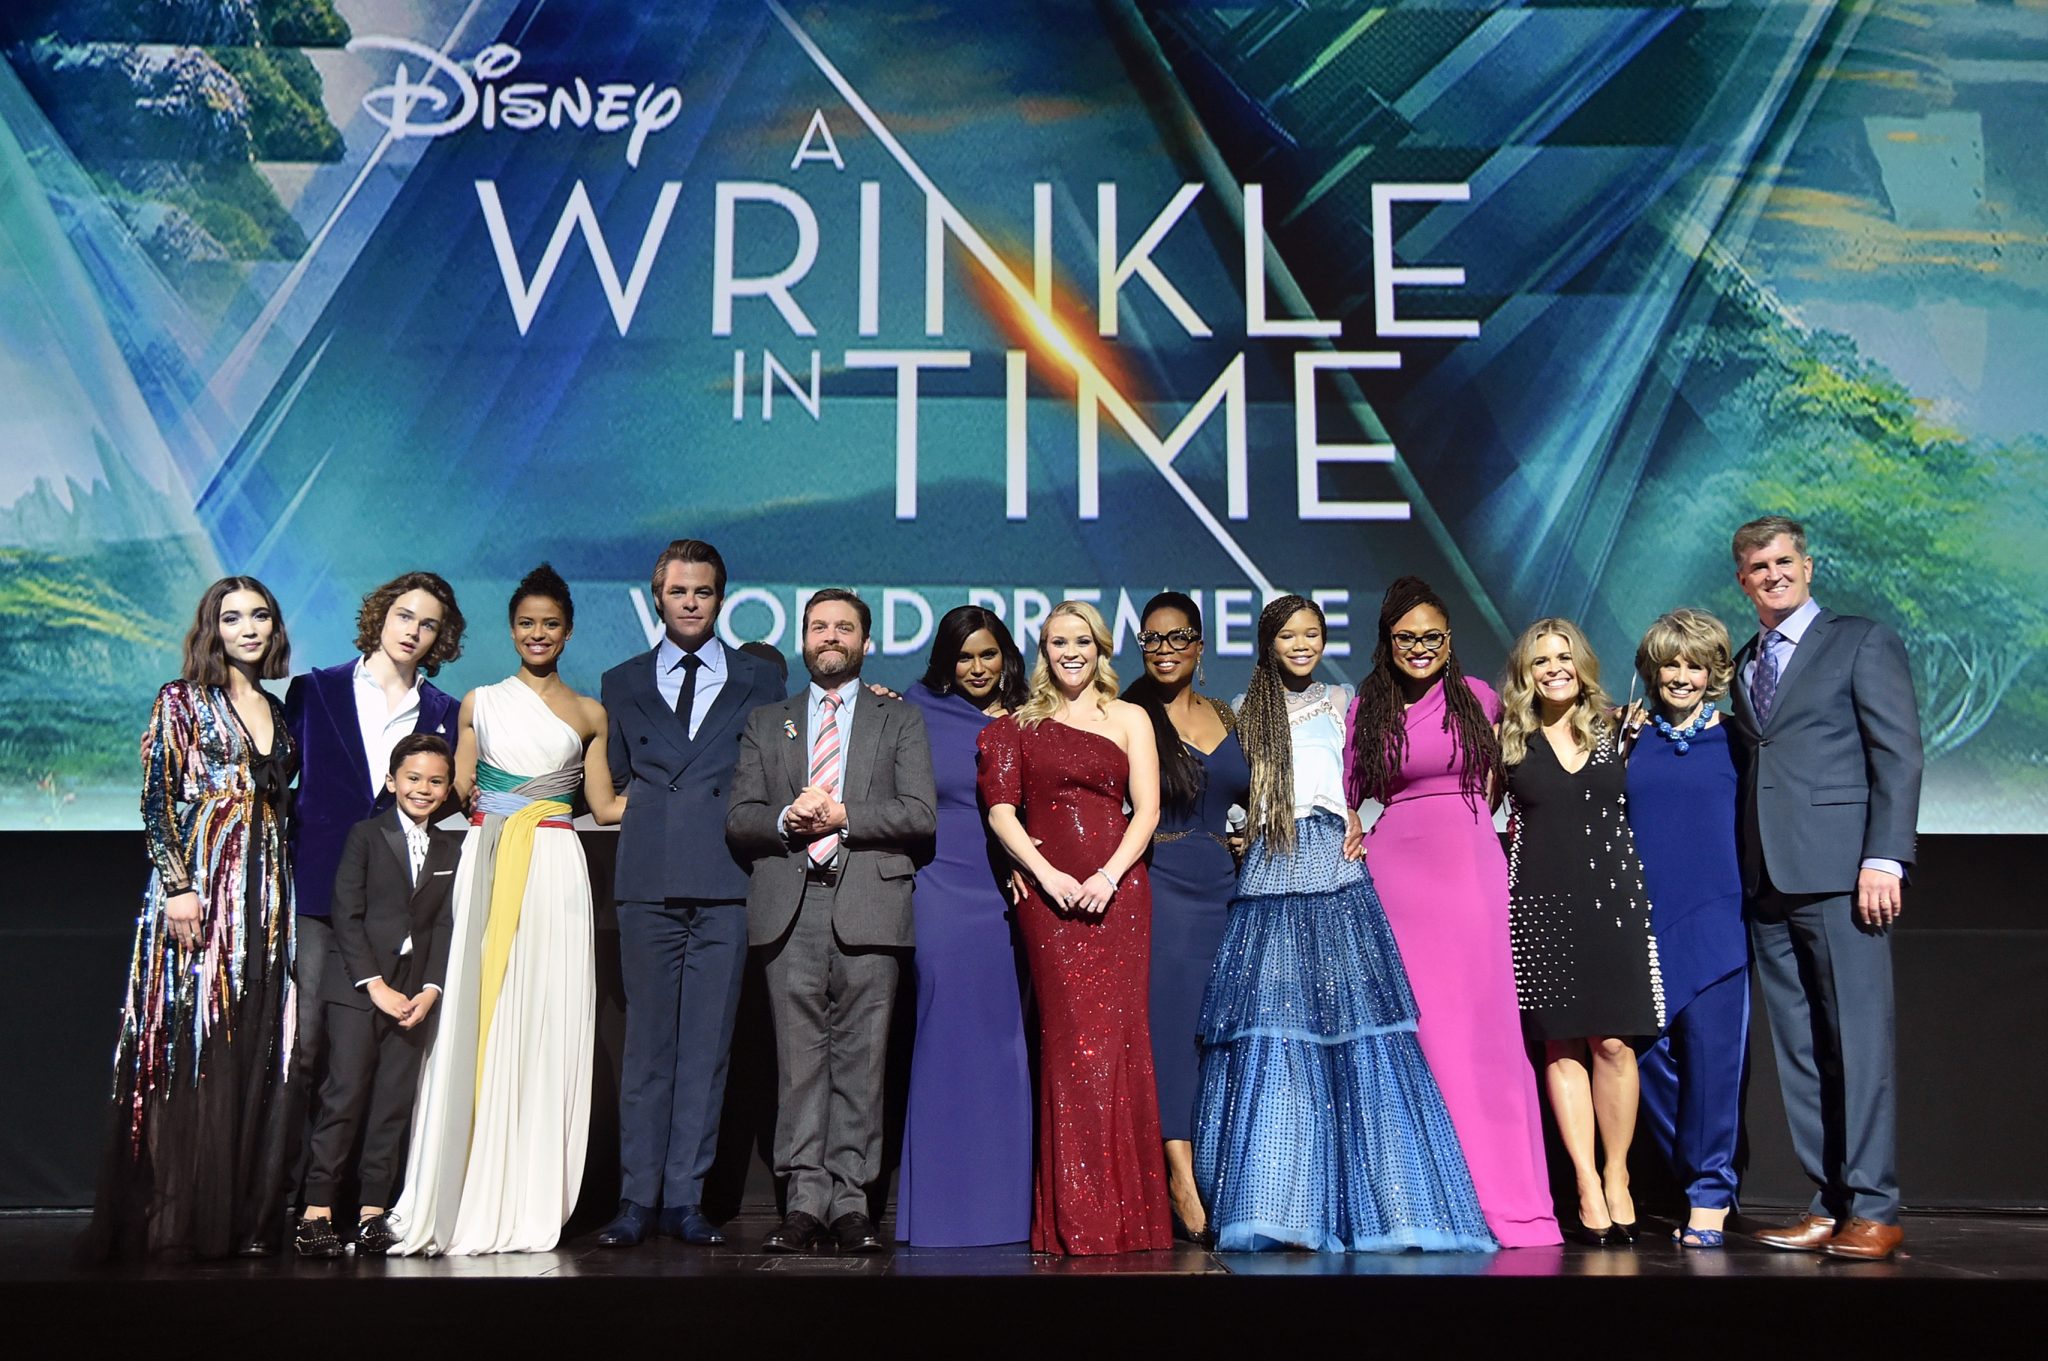 Disney’s A Wrinkle In Time World Premiere